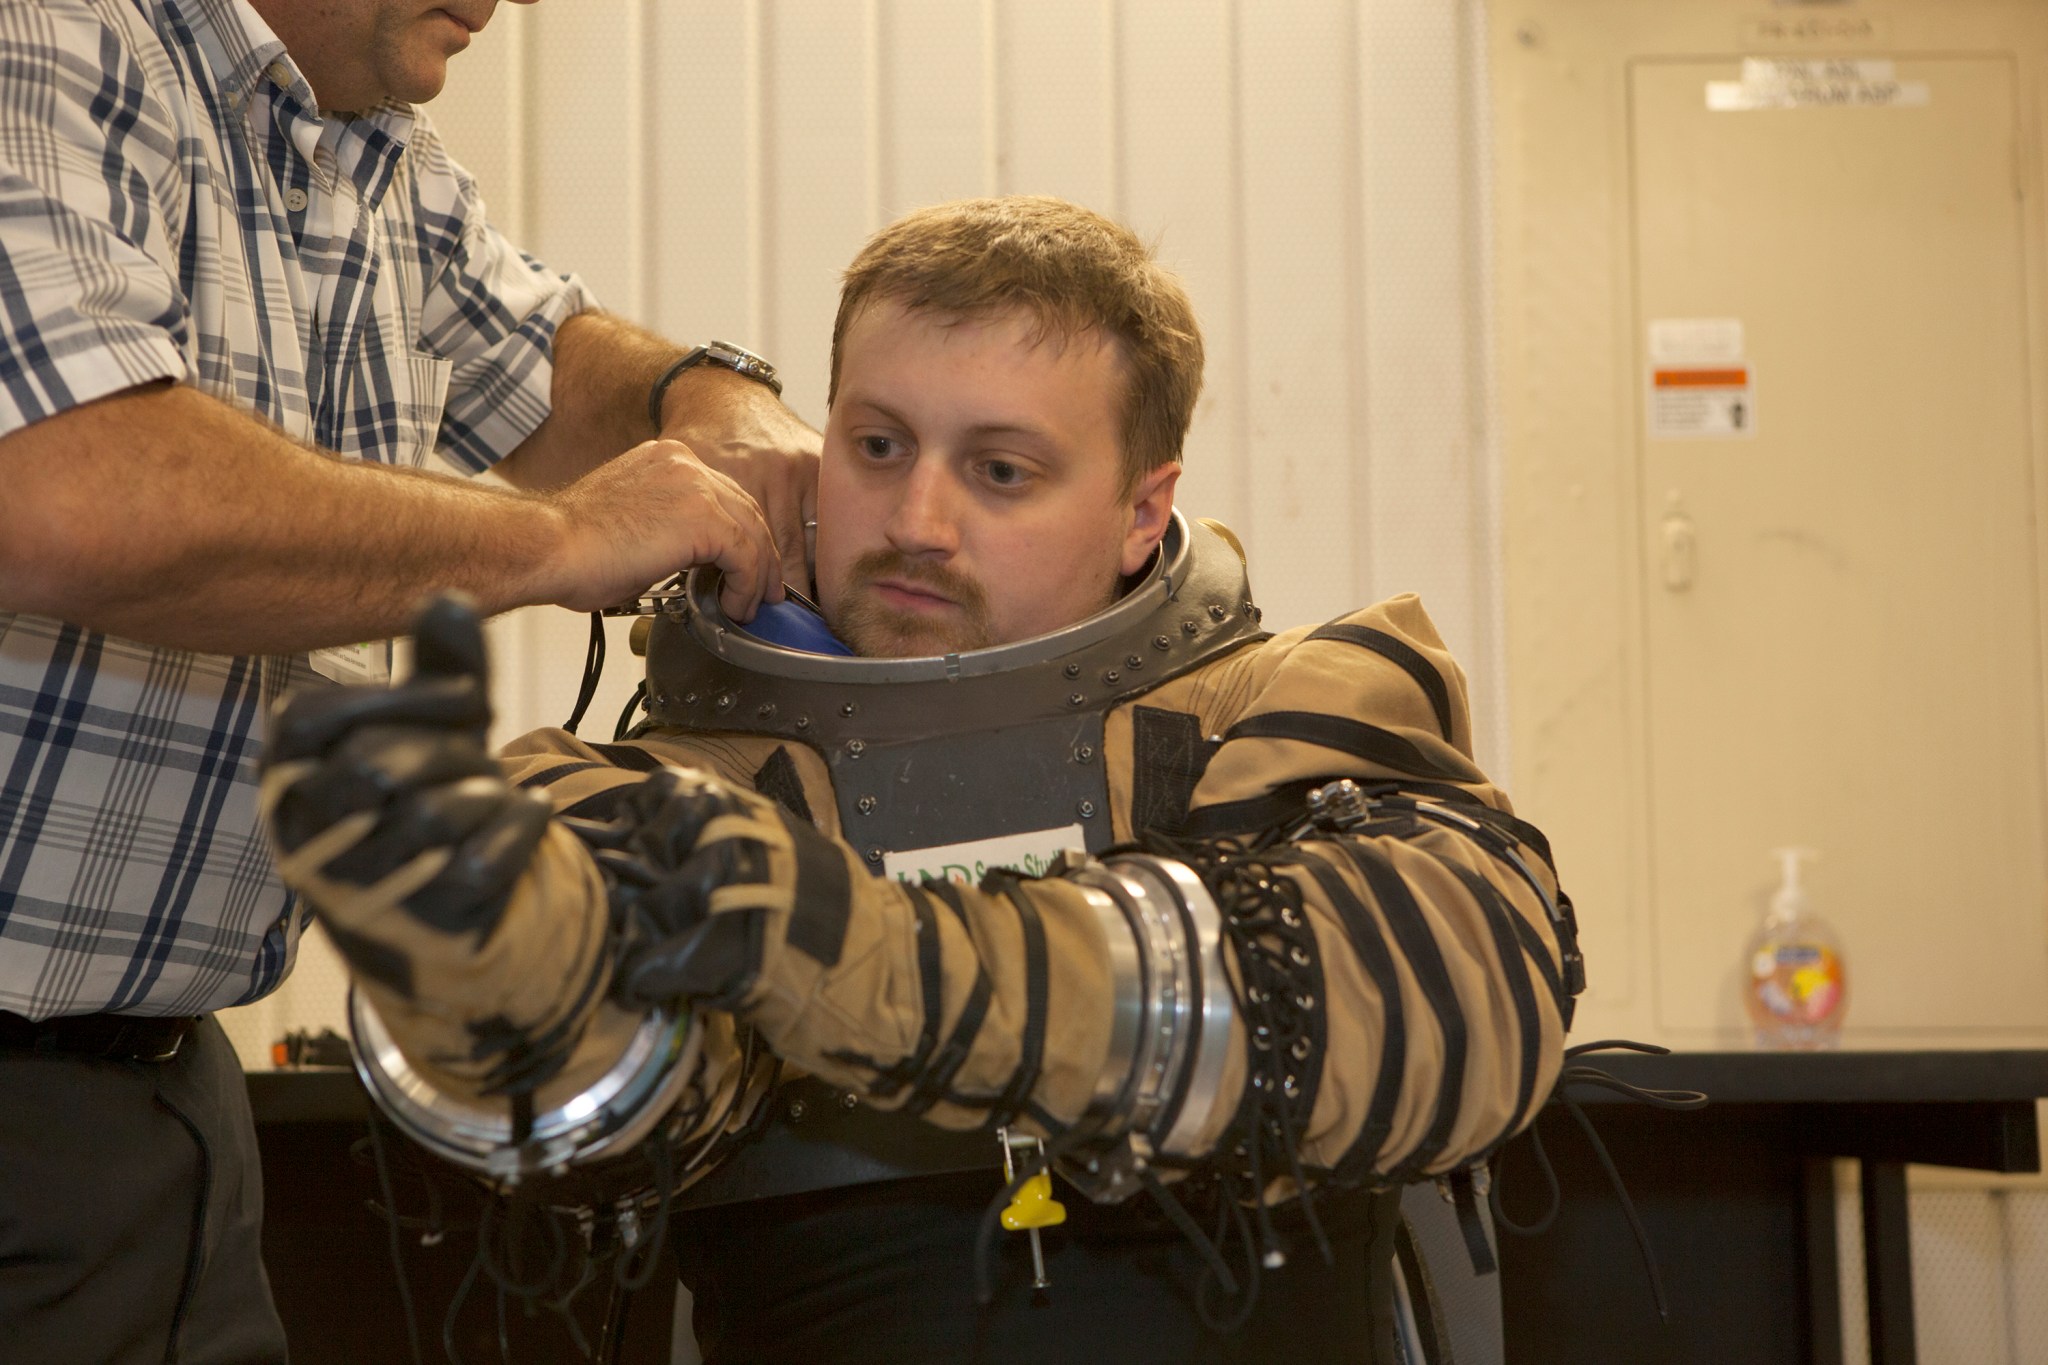 Spacesuit evaluator gets into spacesuit for testing.